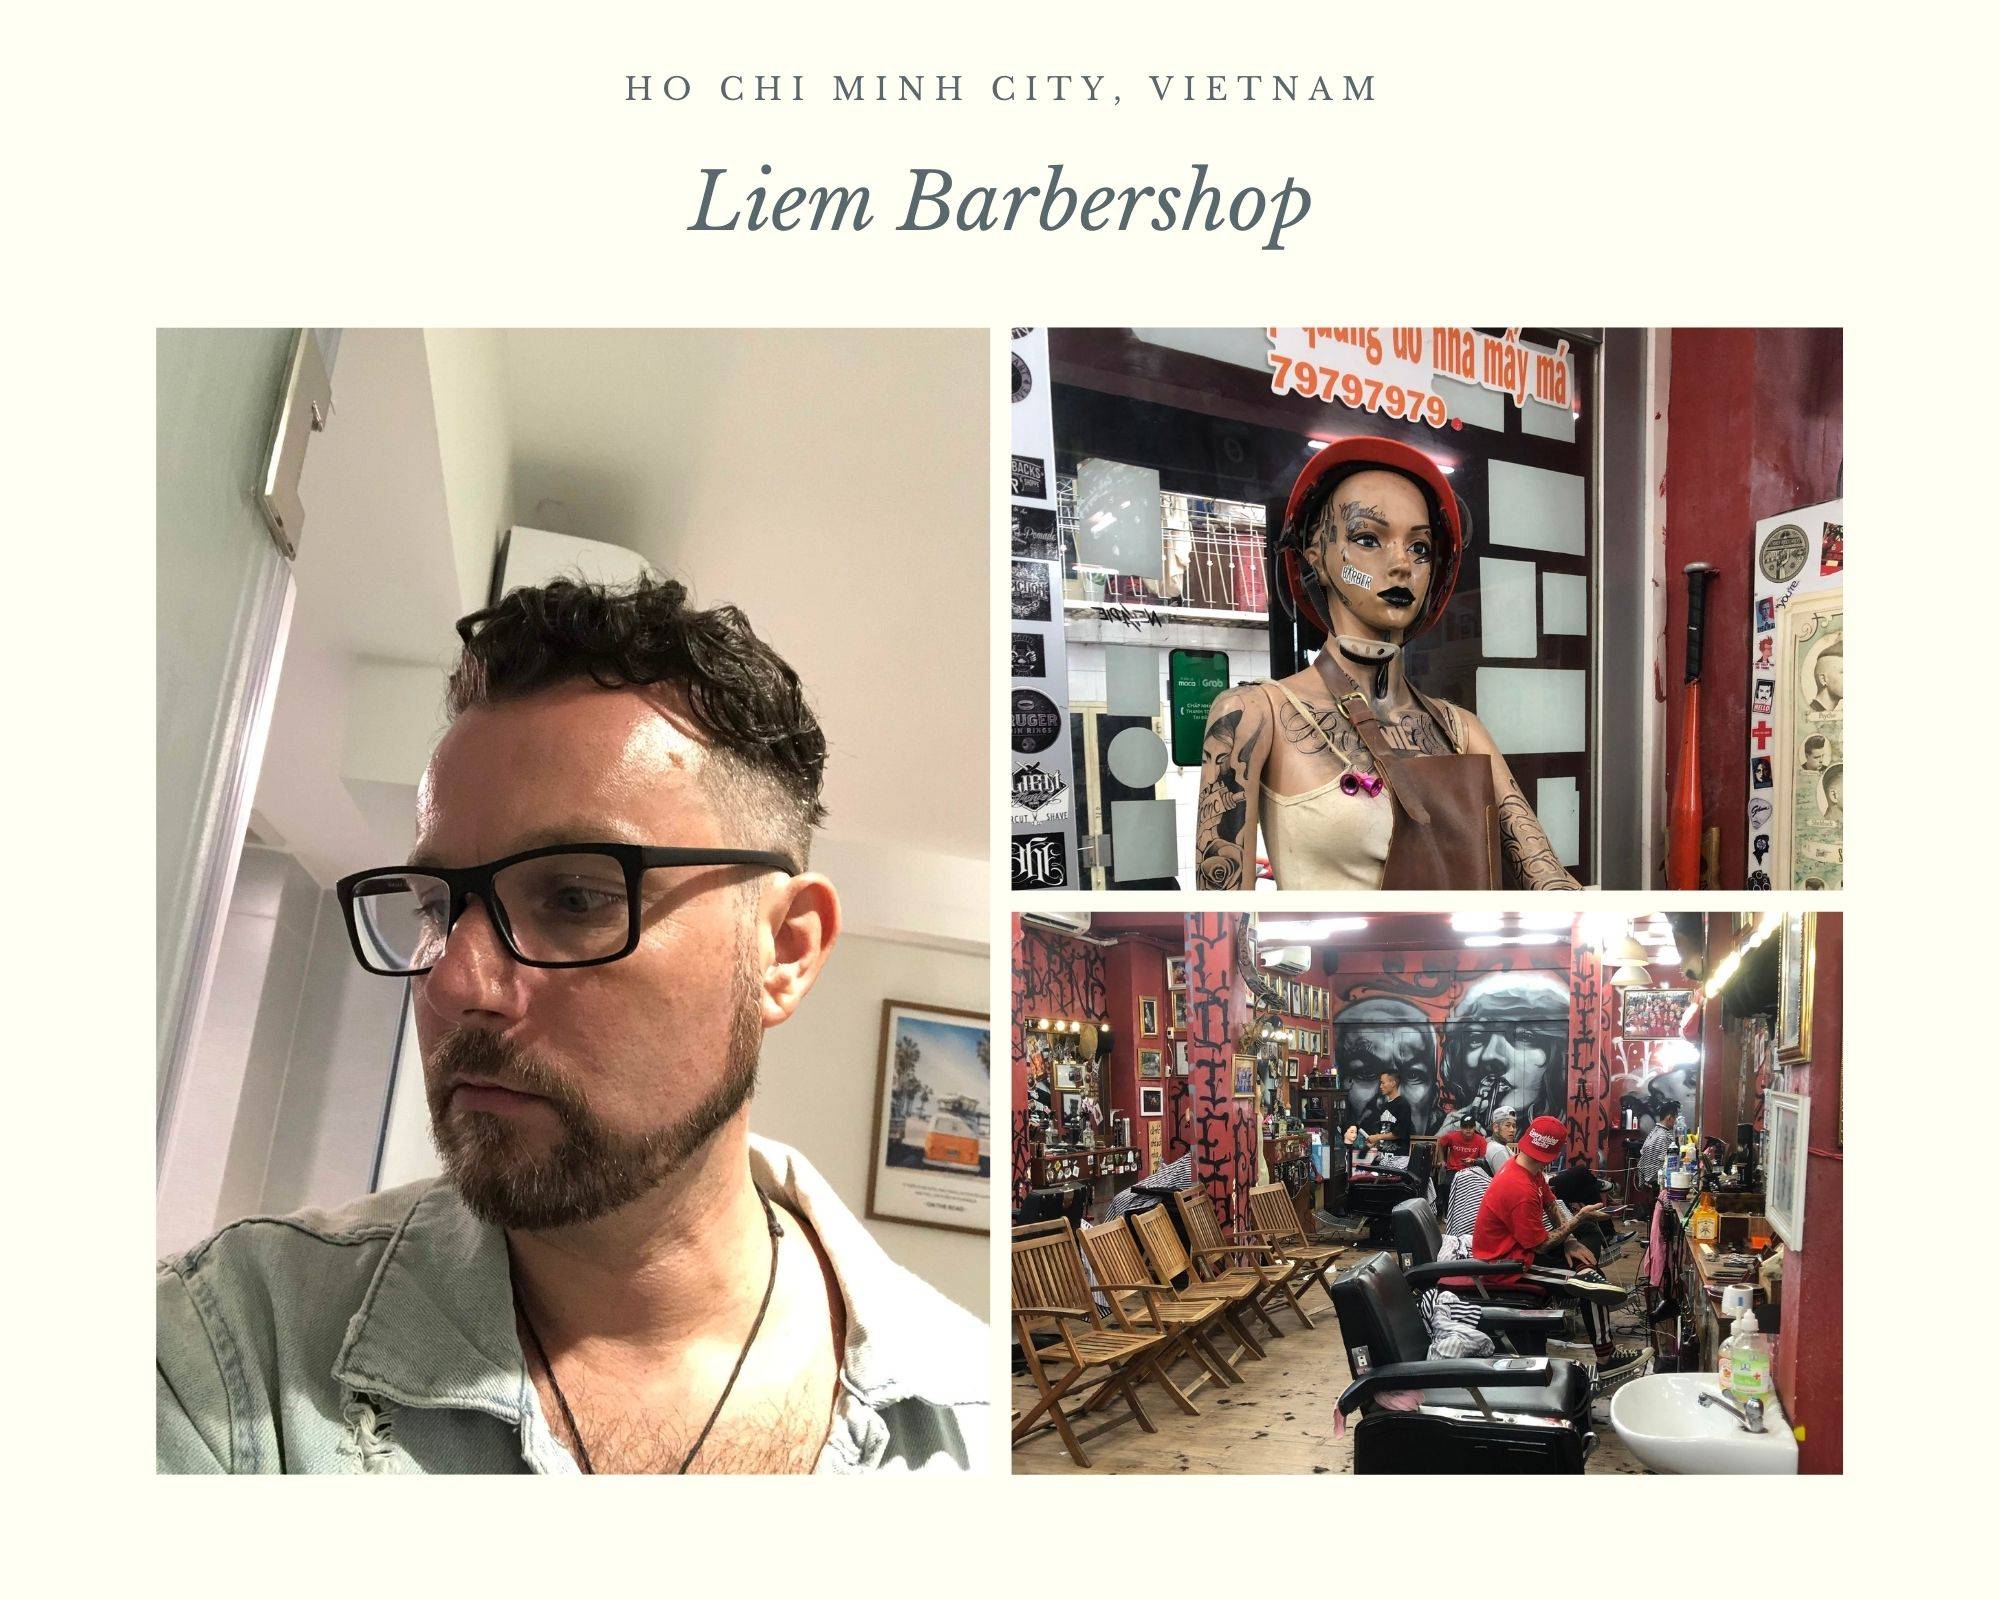 Best Barber in Ho Chi Minh City!